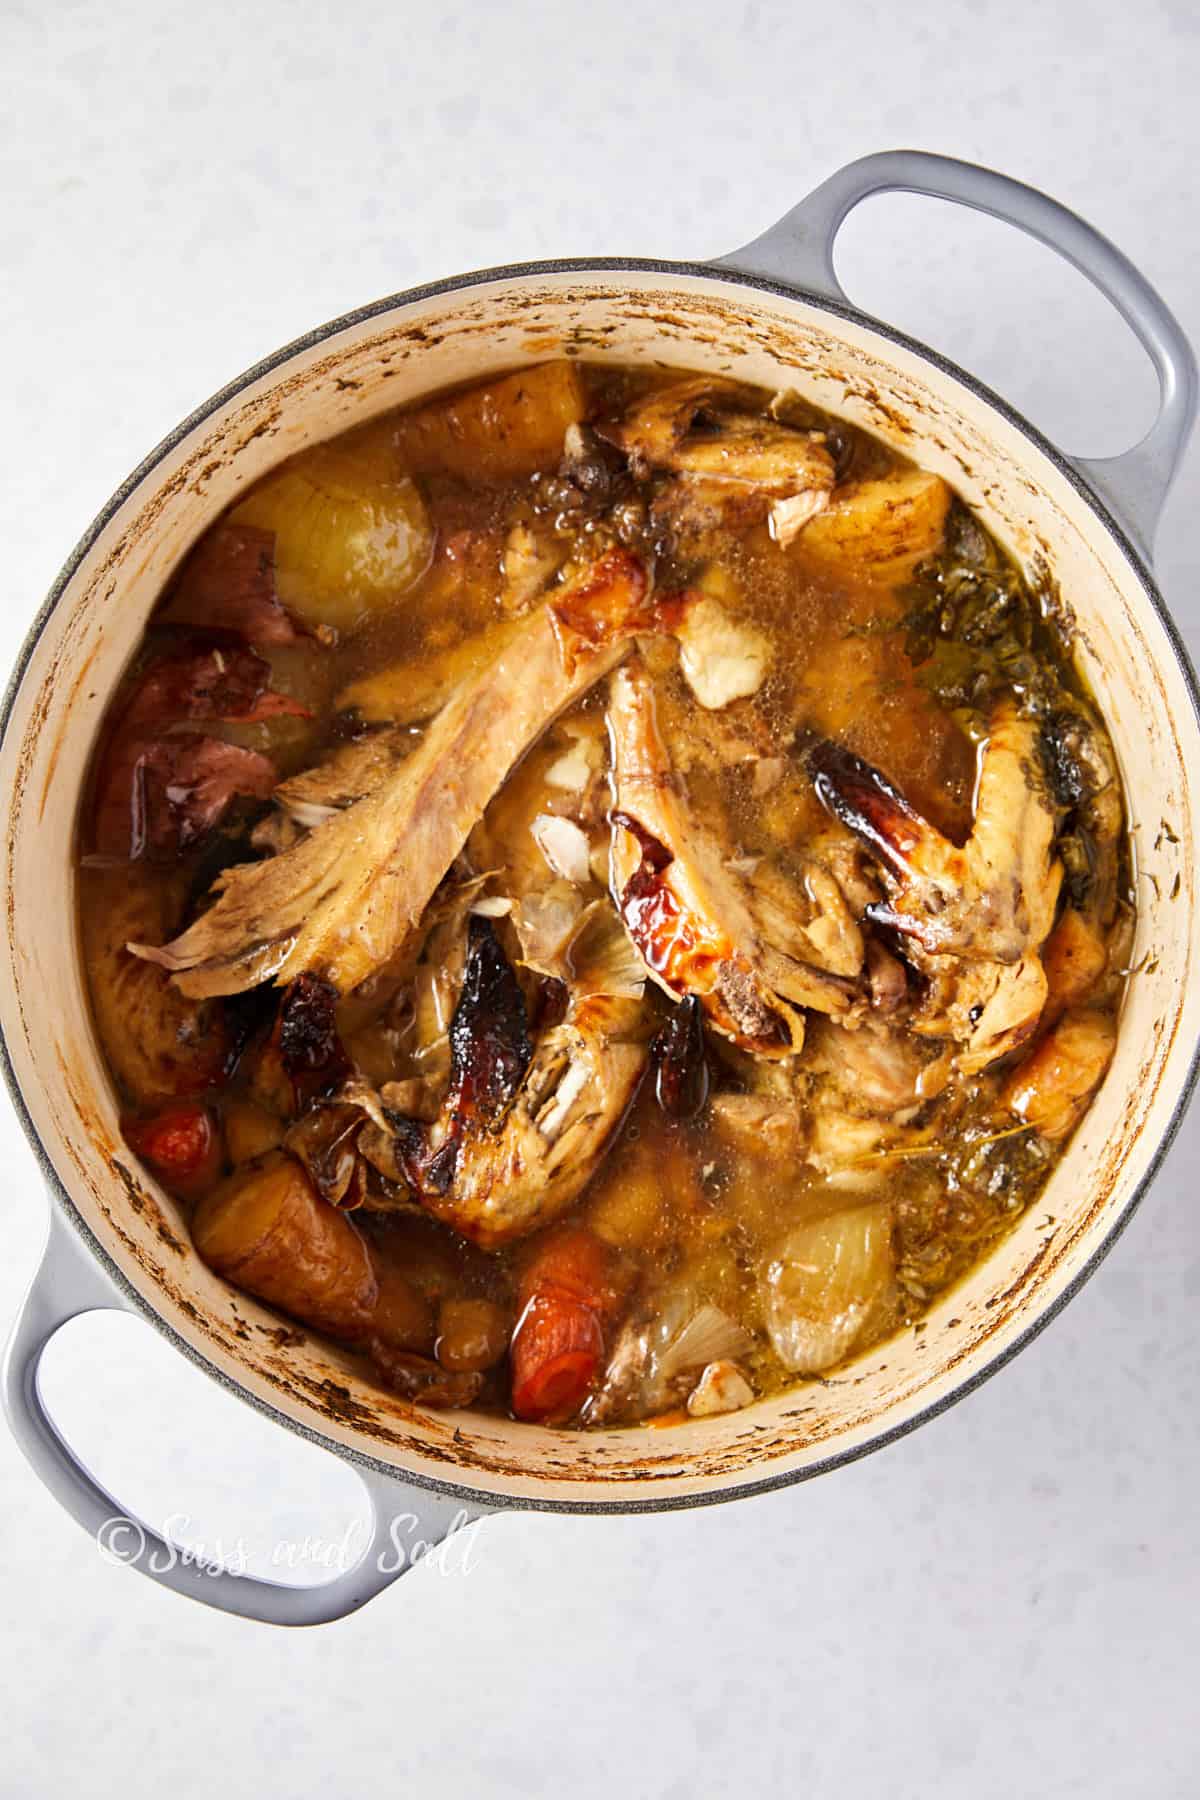 Overhead view of a pot filled with simmered rotisserie chicken bone broth, showing chicken bones with some meat attached, chunks of vegetables, and herbs in a rich, savory liquid. The sides of the pot have a slight browning from the cooking process, and the text "Sass and Salt" is marked at the bottom.





